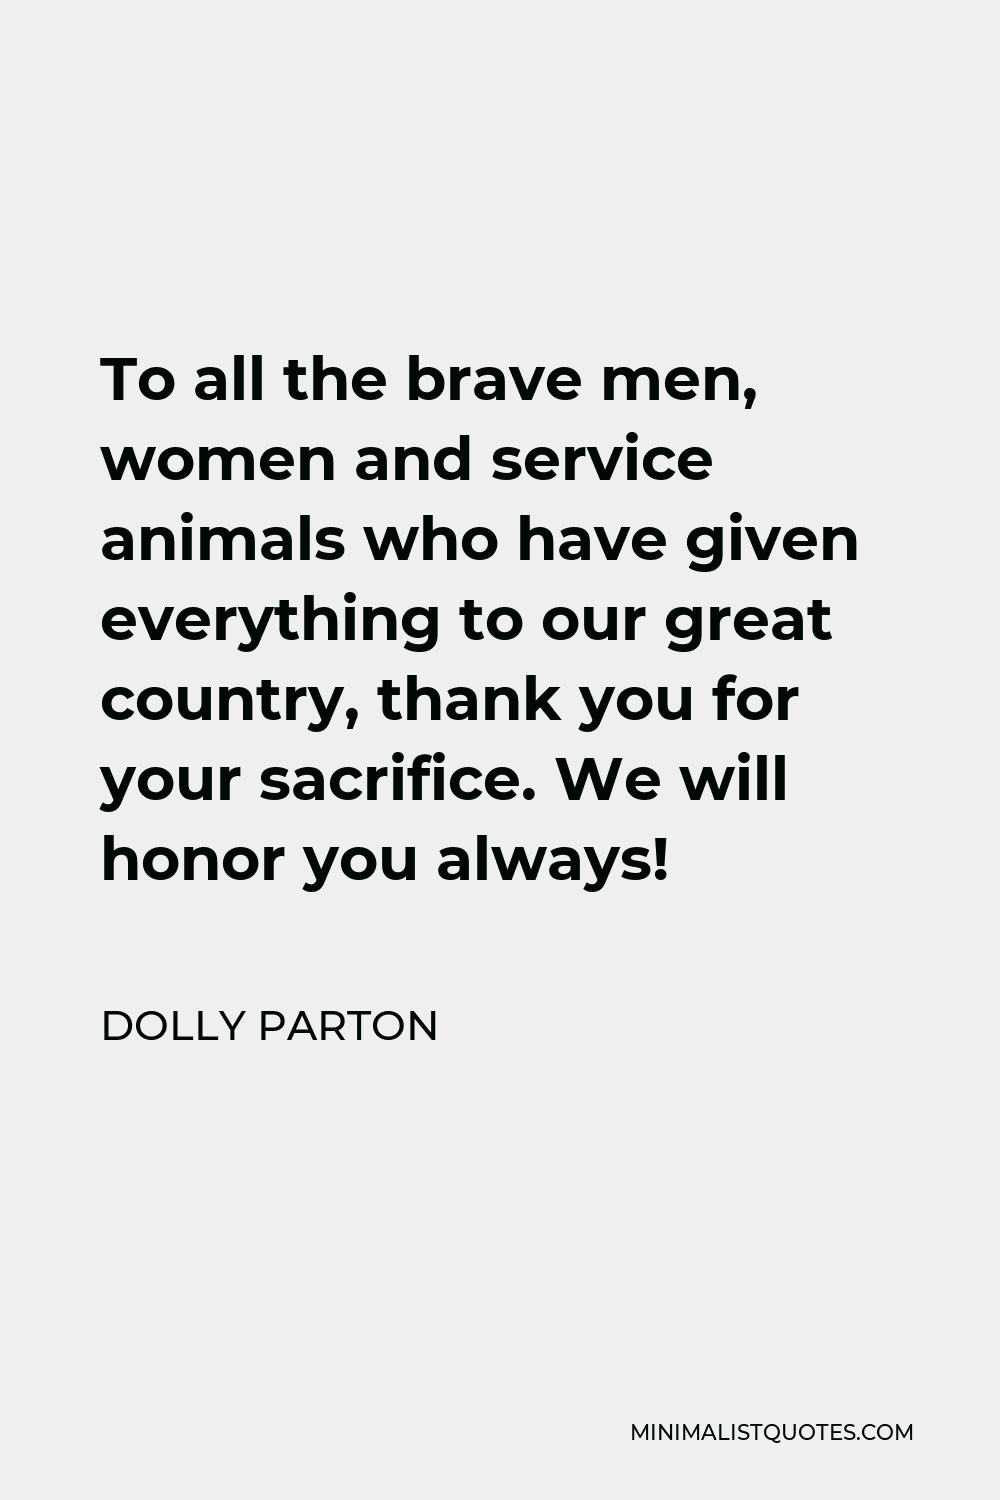 Dolly Parton Quote - To all the brave men, women and service animals who have given everything to our great country, thank you for your sacrifice. We will honor you always!